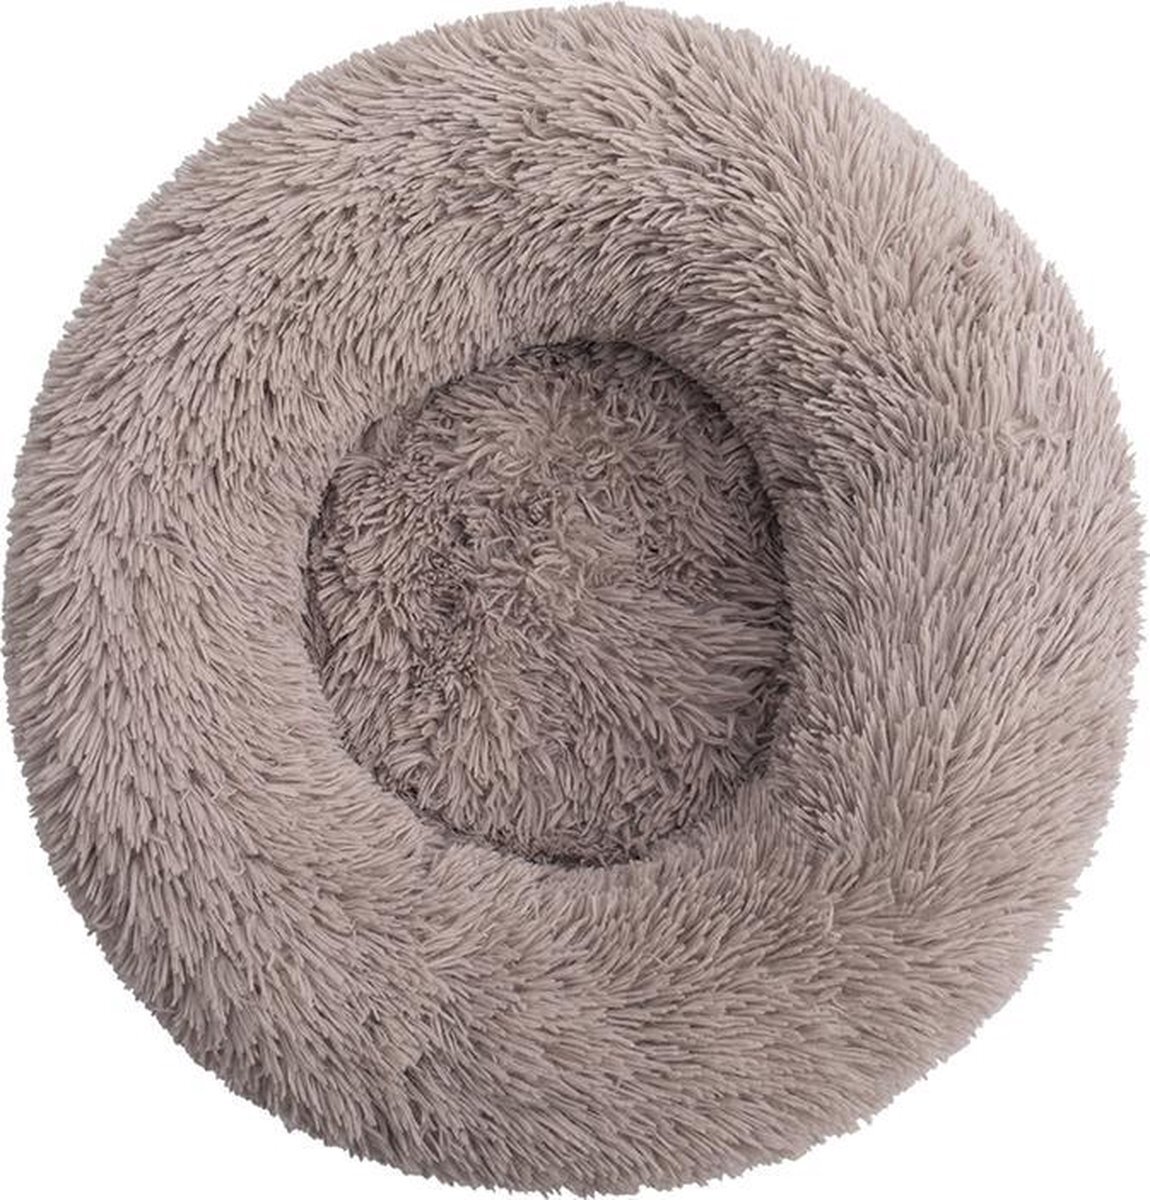 BEESSIES BEESSIES® donut hondenmand/kattenmand 60 cm - wasbare hoes - Taupe - huisdierbed hond kat mand Taupe